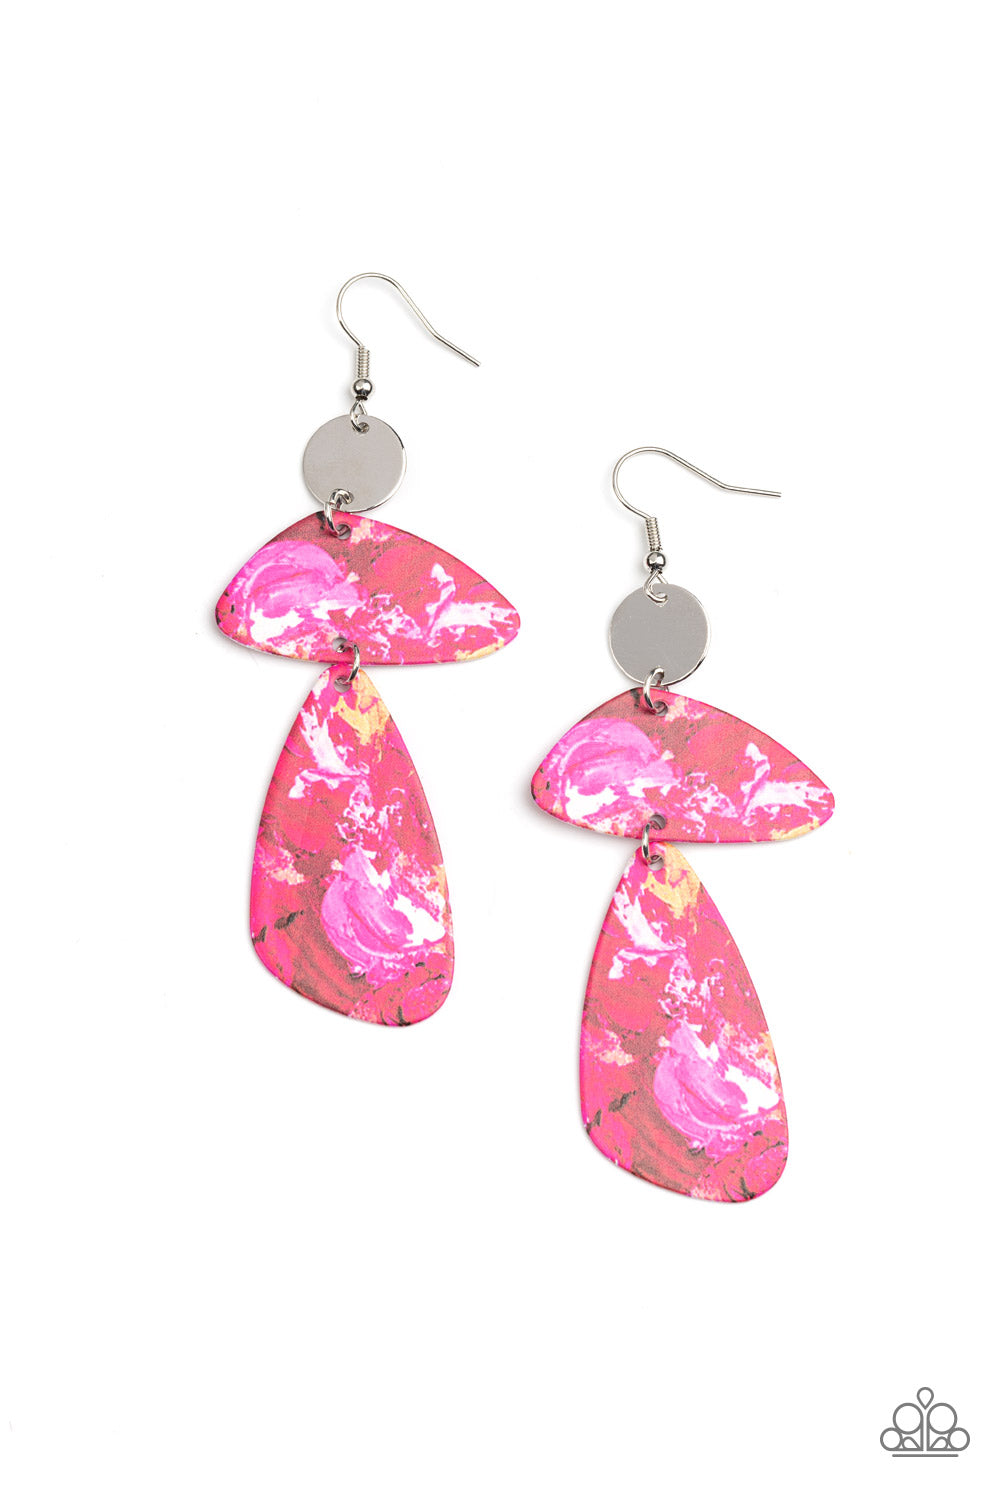 SWATCH Me Now - Abstract Pink Earrings - Paparazzi Accessories